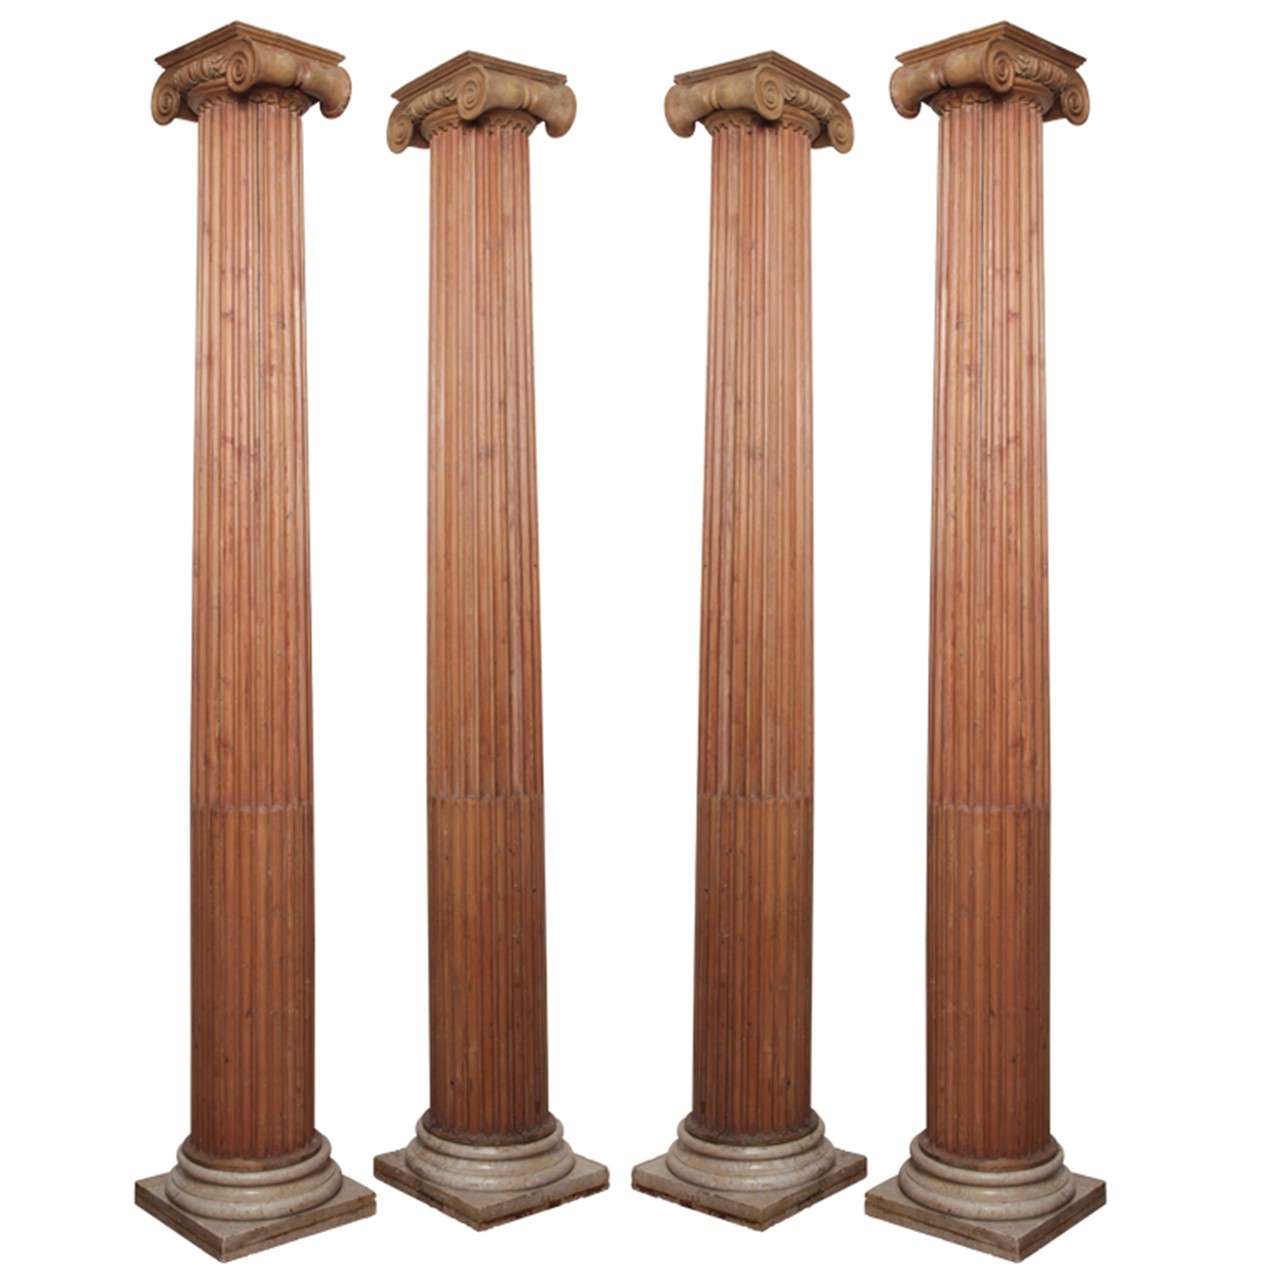 Four by Neoclassicism inspired columns For Sale